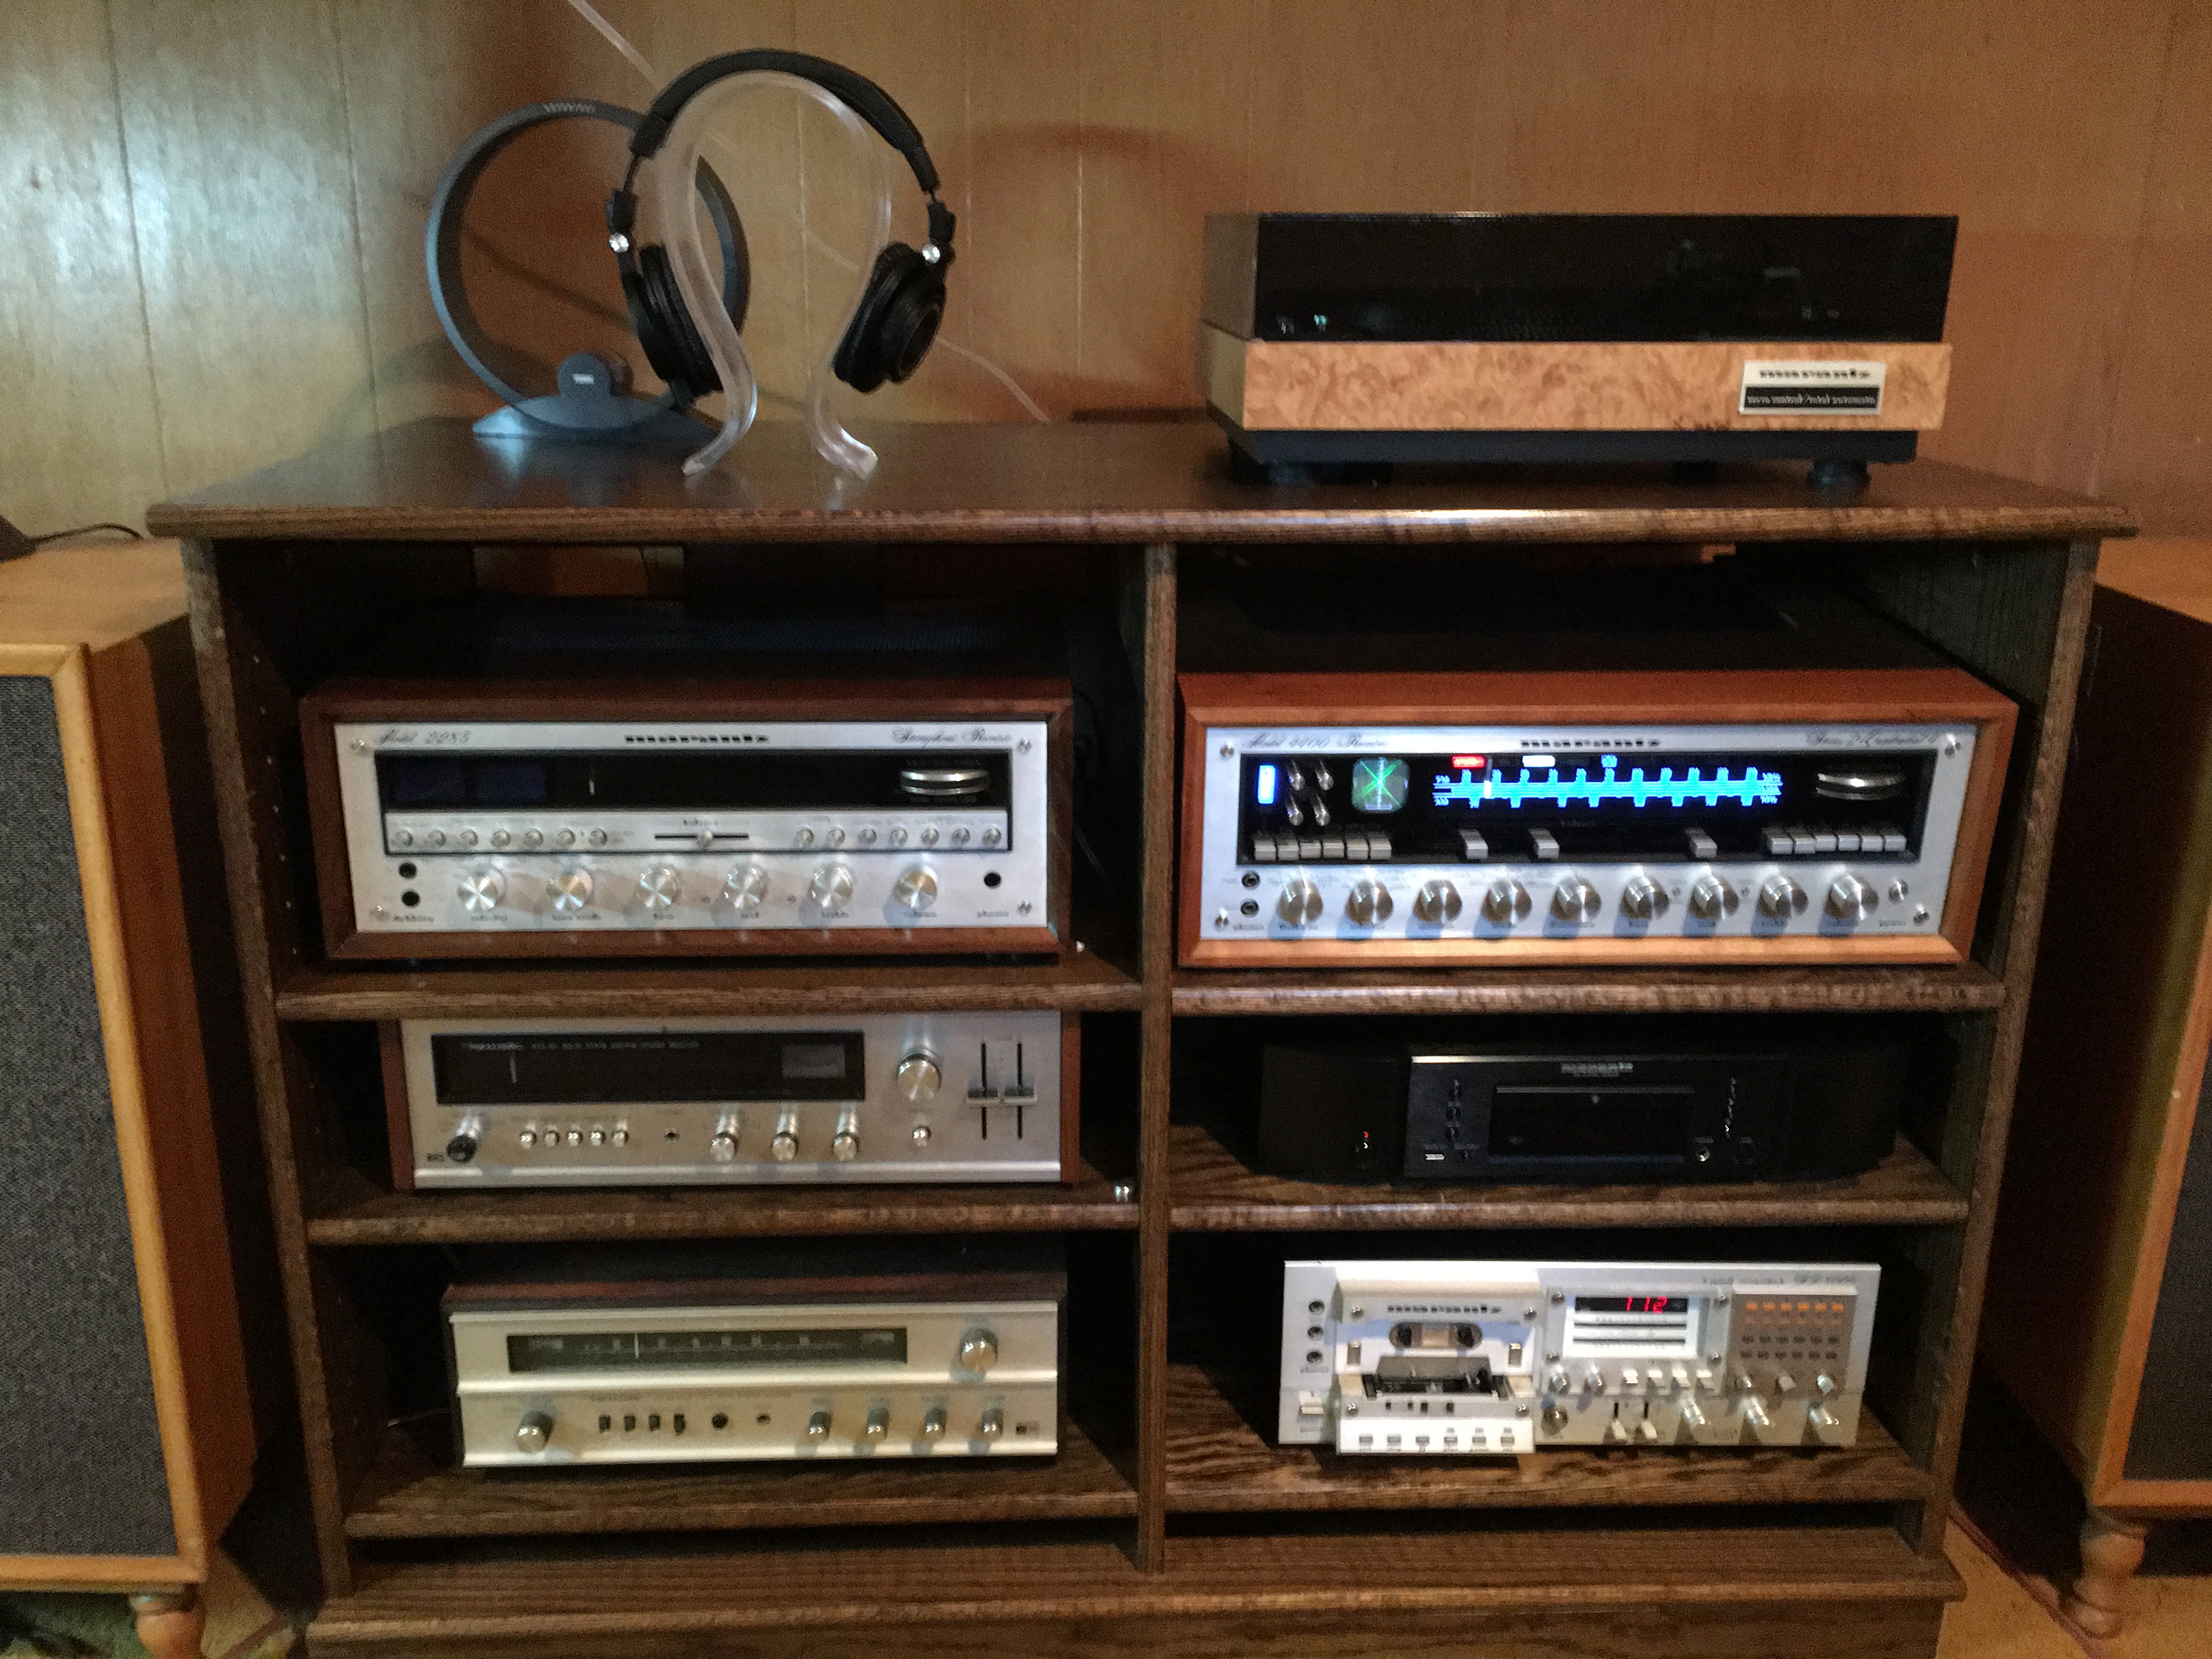 33 inch high double wide stereo cabinet full of vintage Marantz components finished in Minwax English chestnut on oak.